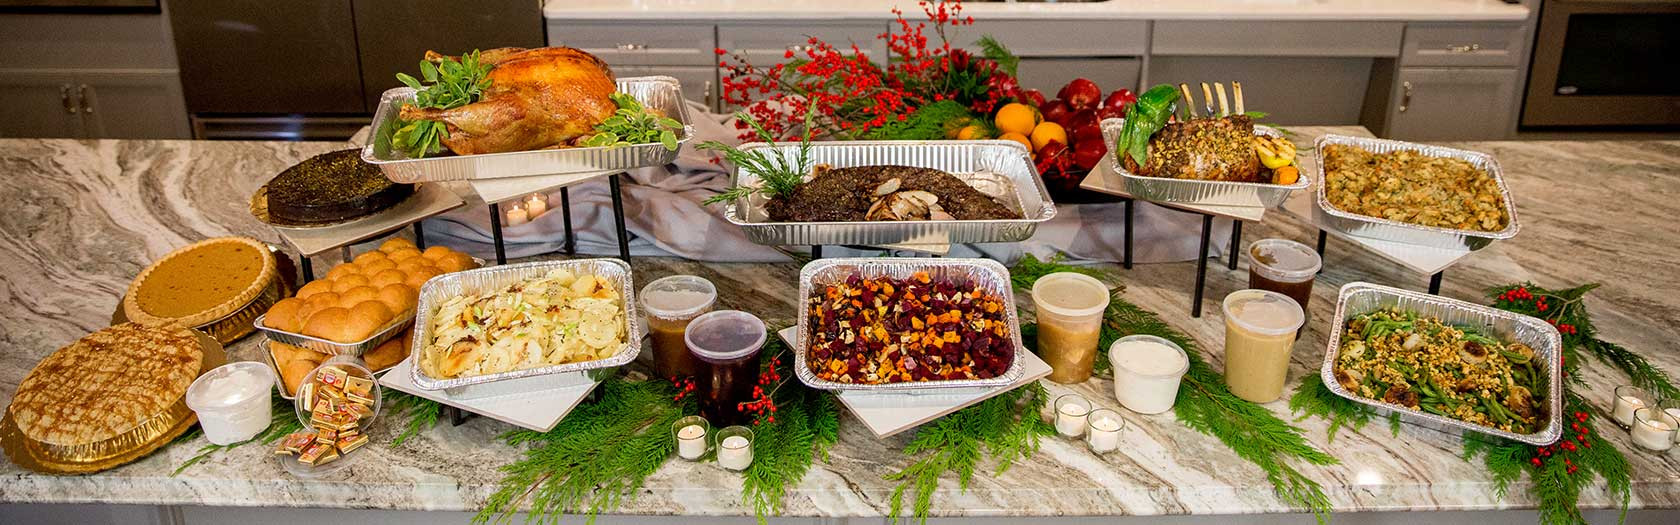 Order Christmas Dinner
 Order Your Holiday Dinner From Mazzone Hospitality